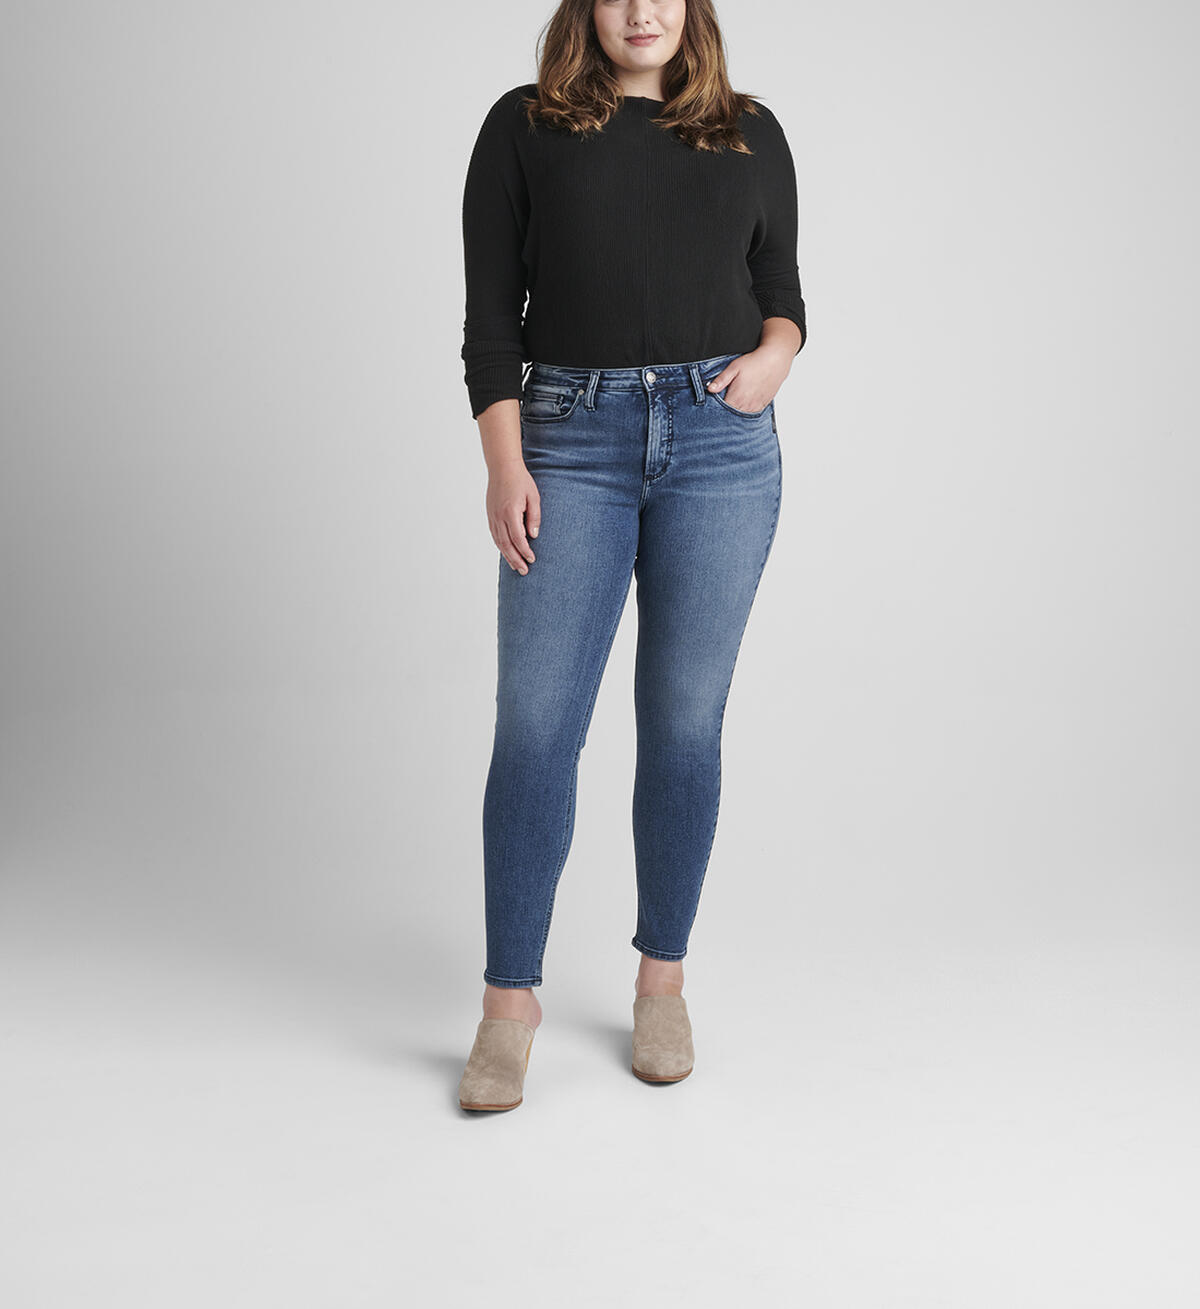 Most Wanted Mid Rise Skinny Jeans Plus Size, , hi-res image number 0